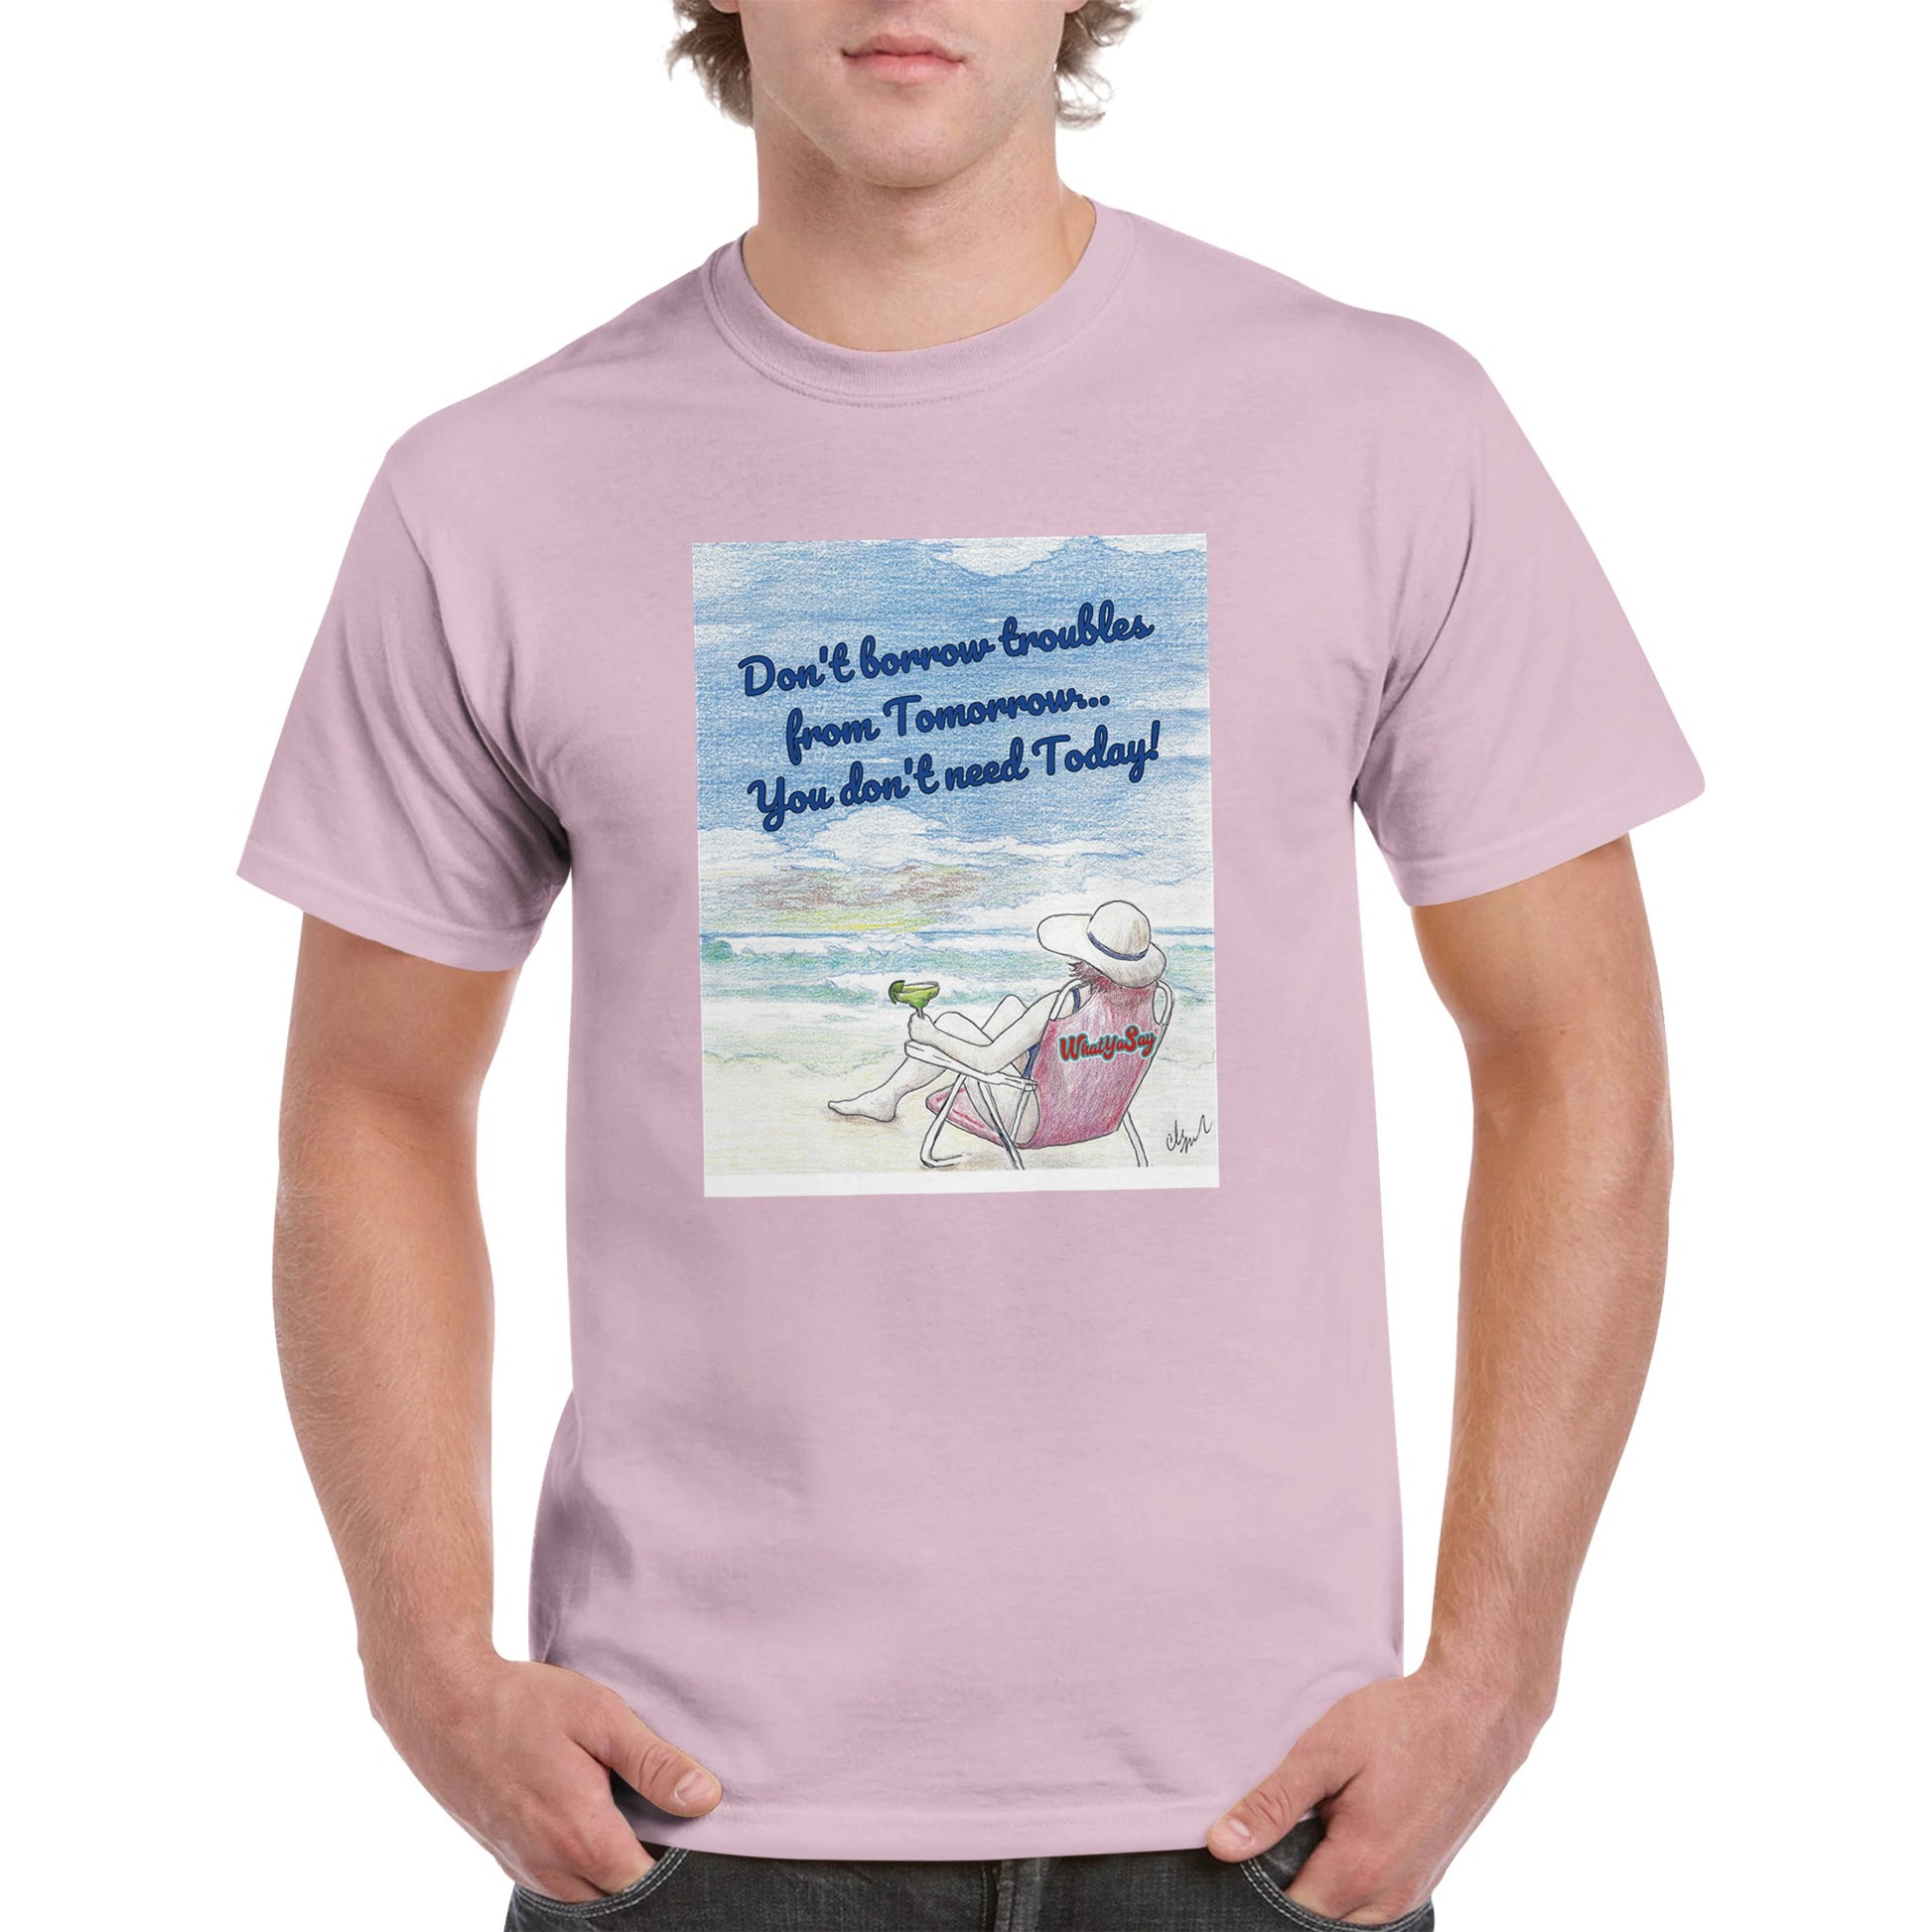 A pink heavyweight Unisex Crewneck t-shirt with original artwork and motto Don’t borrow troubles from Tomorrow… You don’t need Today! on front with WhatYa Say logo on image from WhatYa Say Apparel worn by blonde-haired male front view.